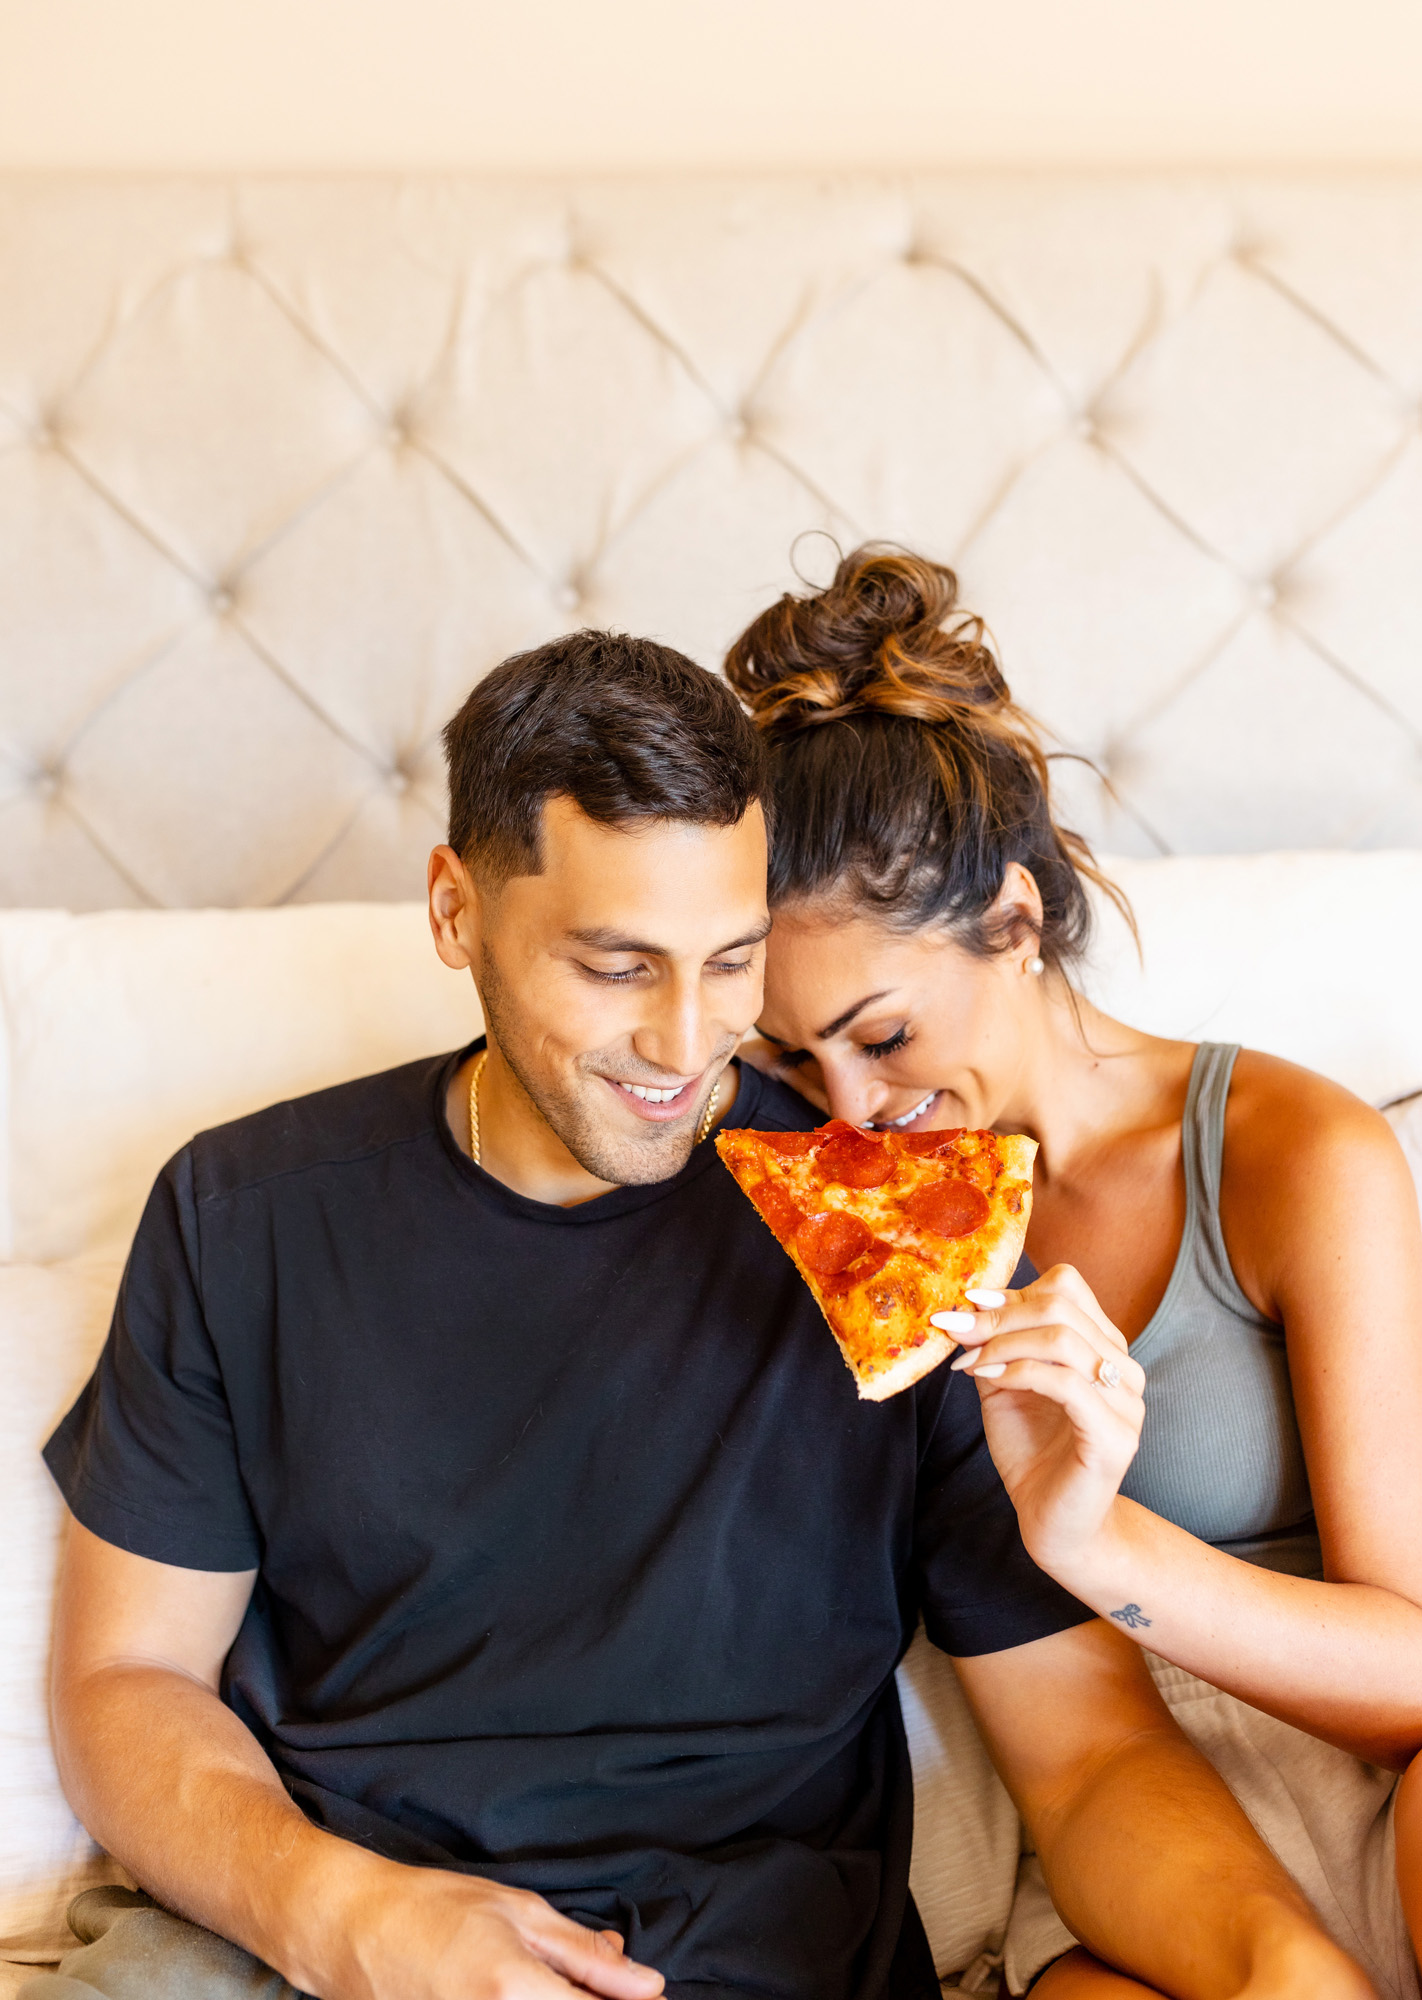 Engagement Photos with Pizza